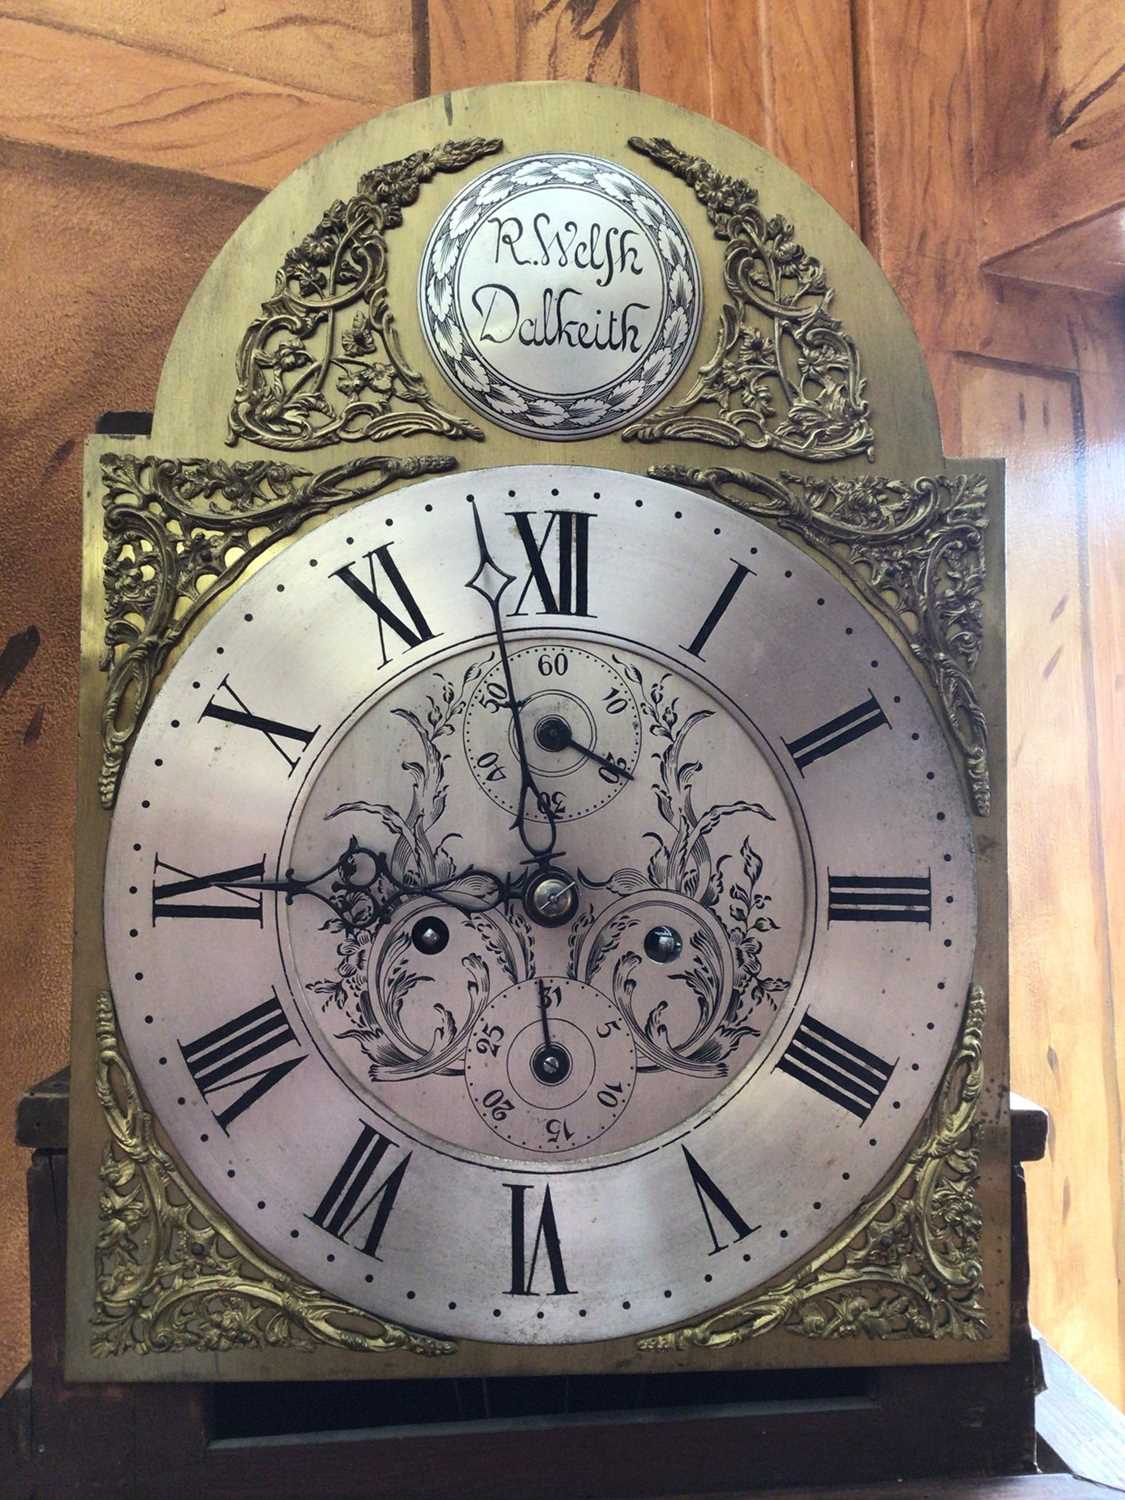 R. Welsh, Dalkeith, late 18th century 8 day longcase clock - Image 4 of 6